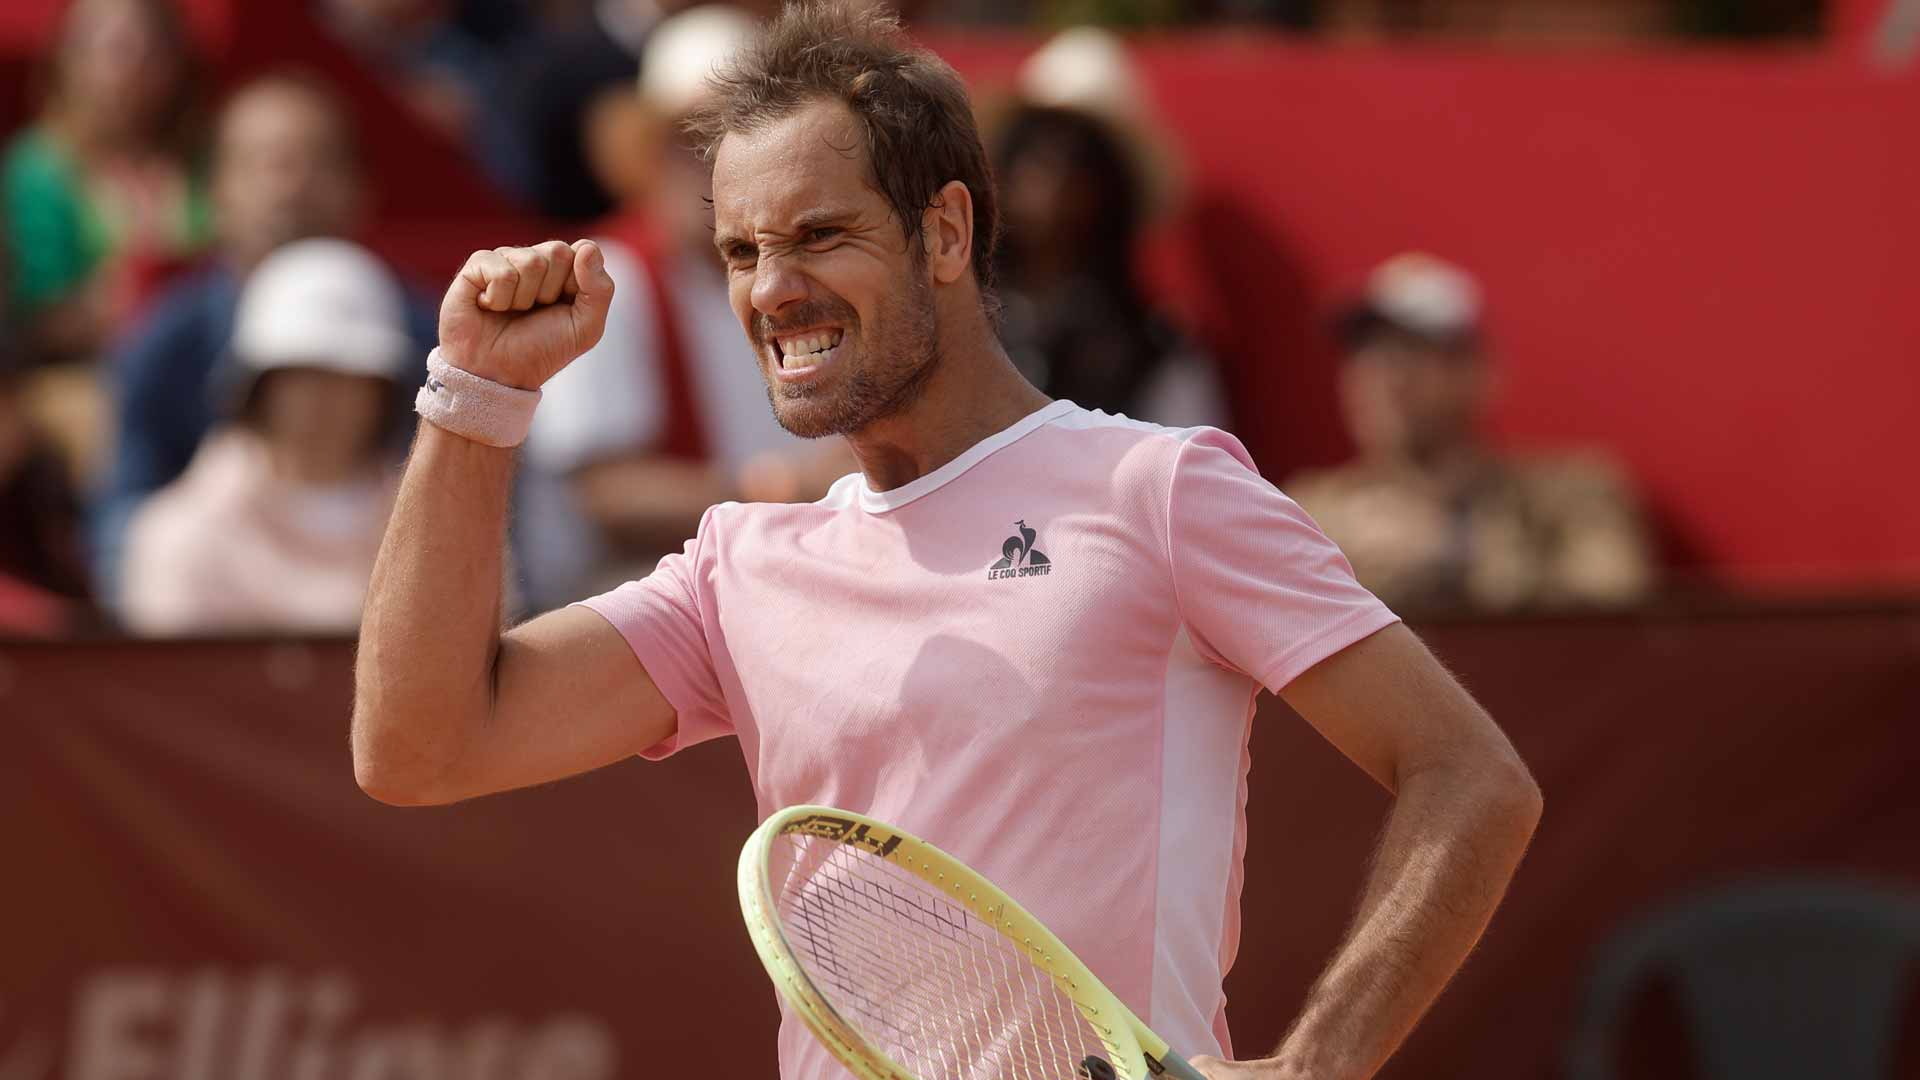 Richard Gasquet celebrates a quarter-final win at the Challenger 175 event in Bordeaux, France.